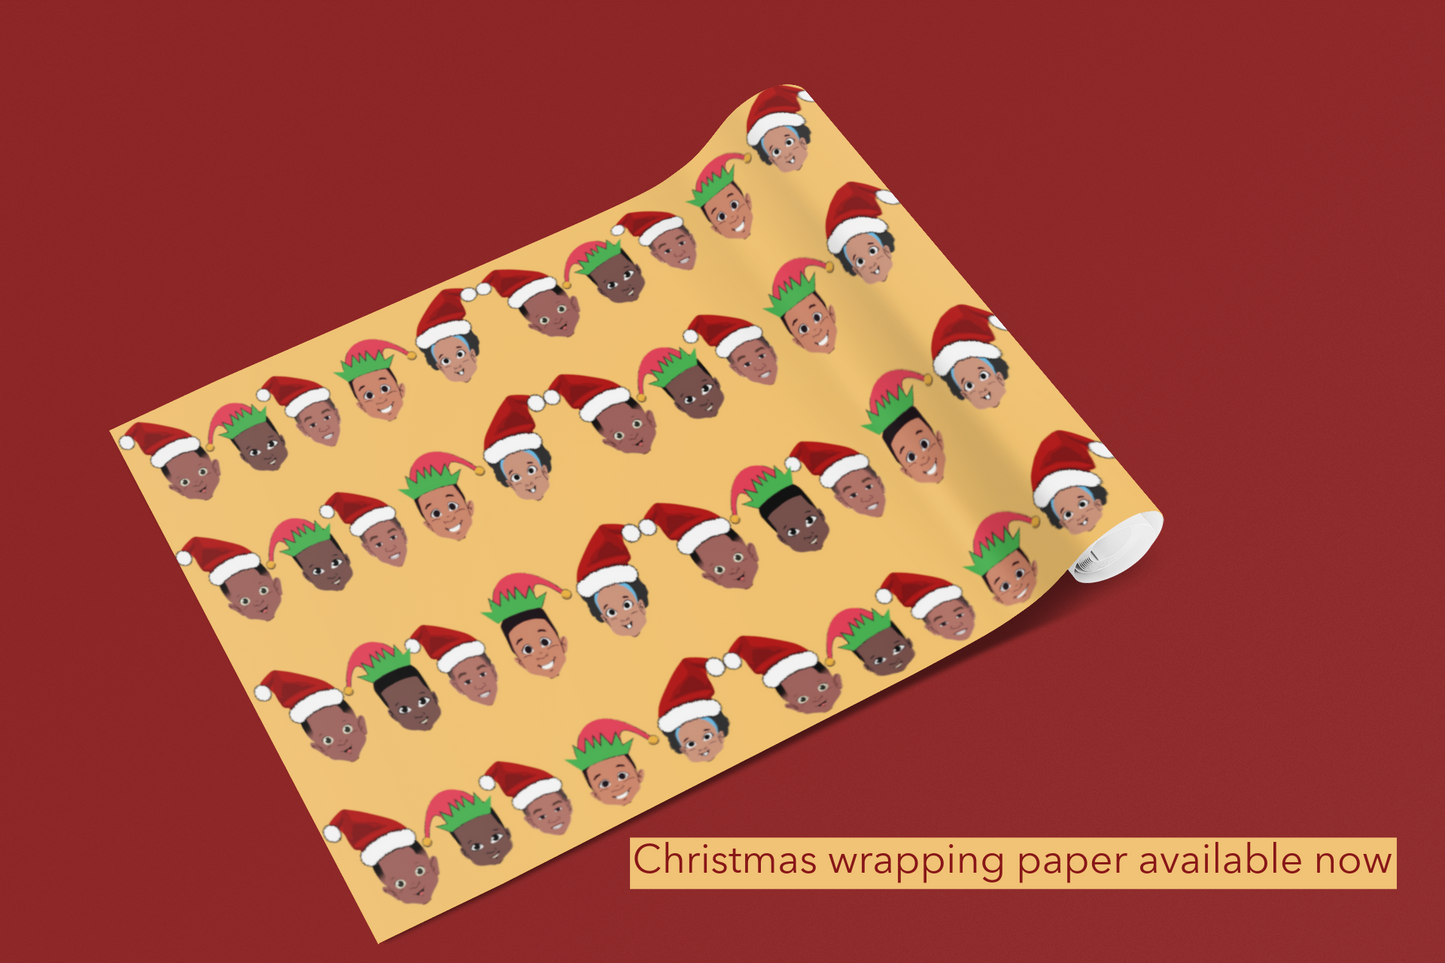 Ez and Friends Christmas Wrapping Paper